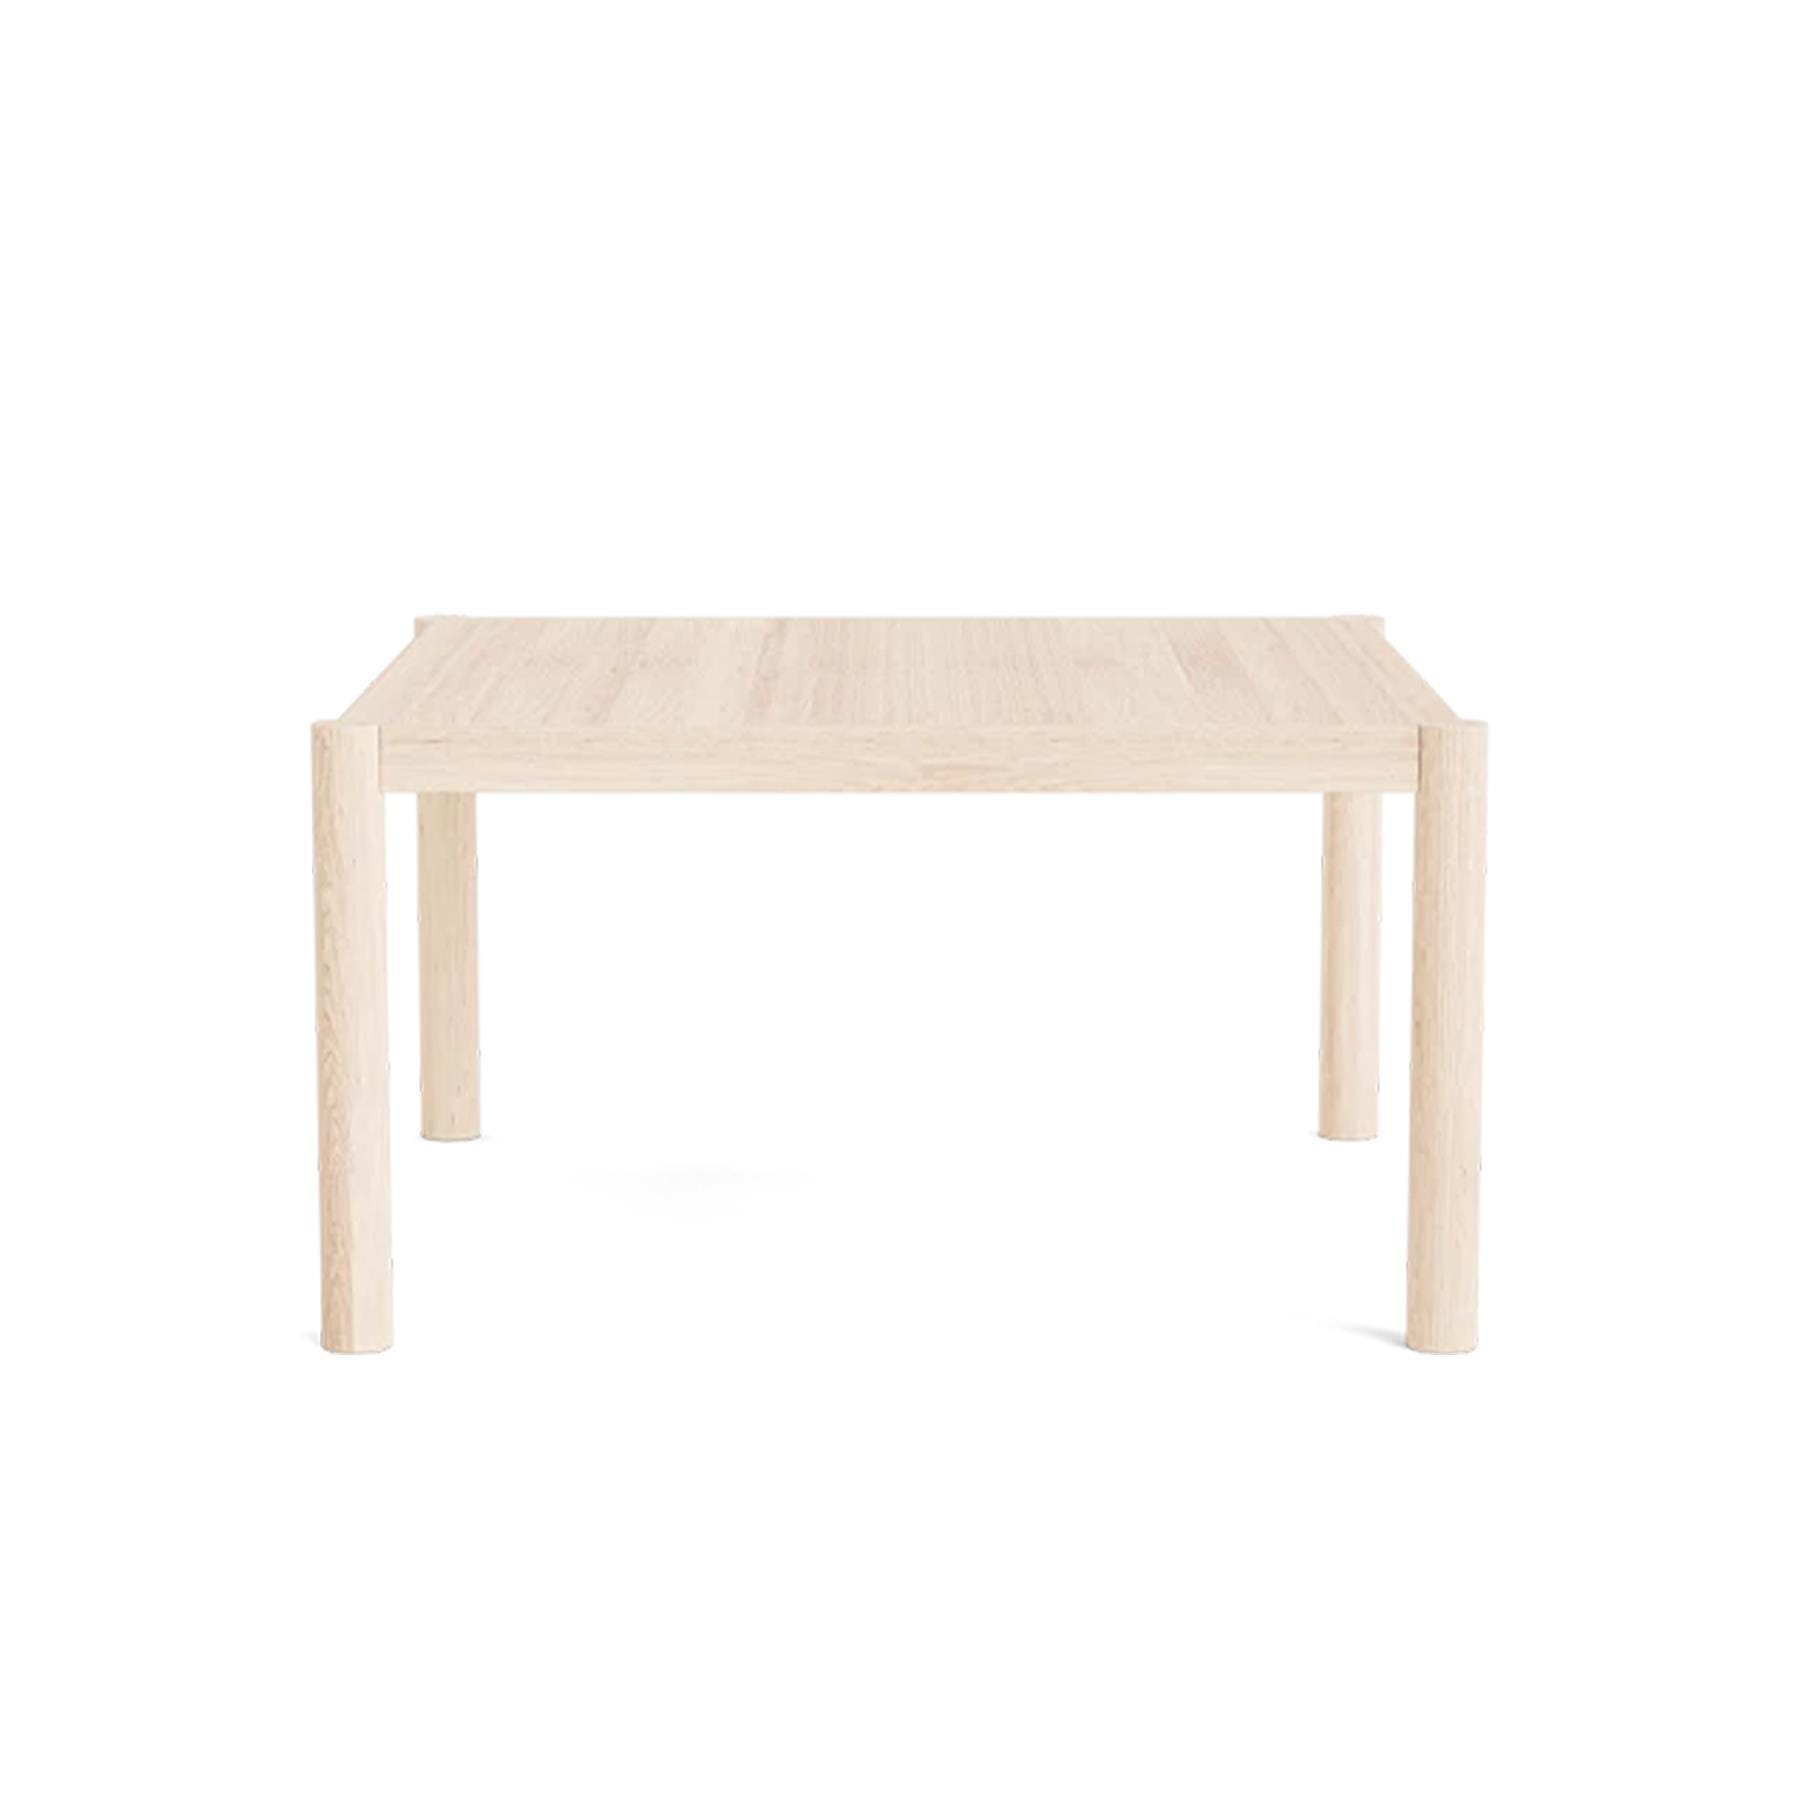 Make Nordic Tammi Coffee Table Square Height 38cm Oak White Oil Light Wood Designer Furniture From Holloways Of Ludlow